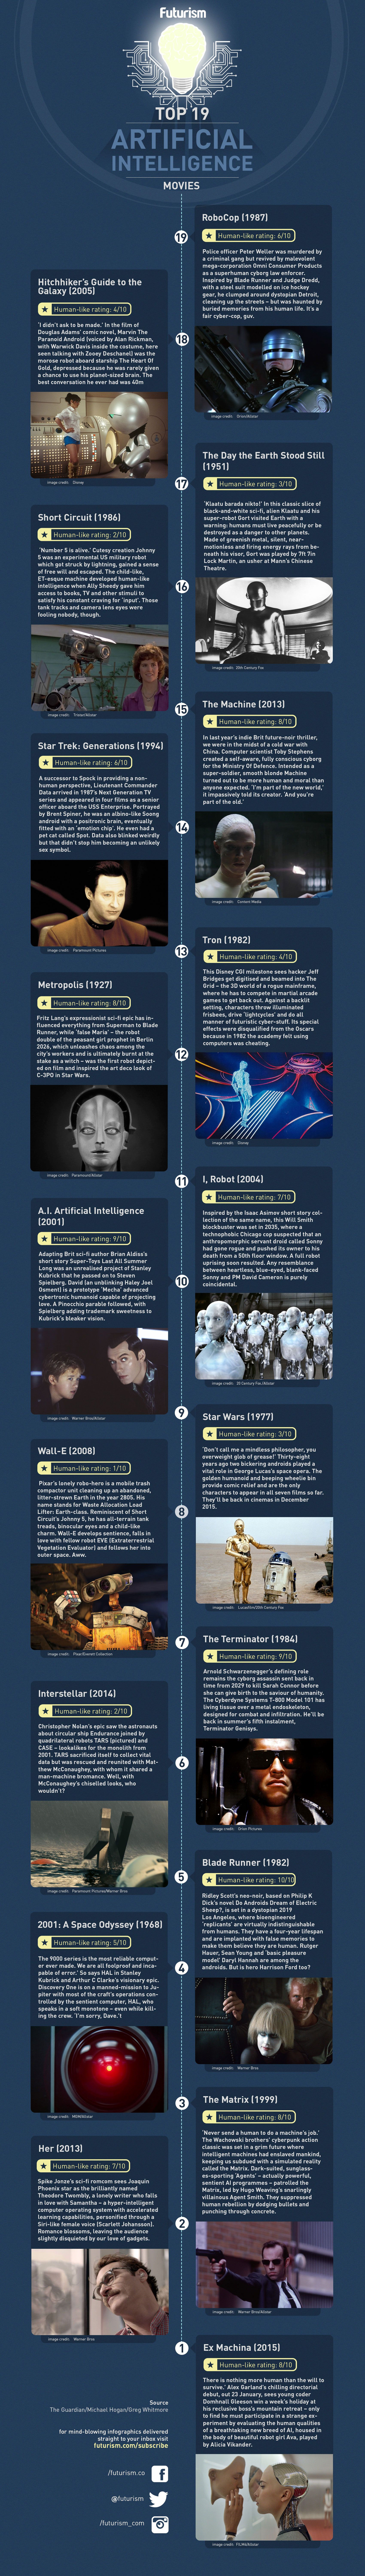 The Top Artificial Intelligence Movies of All Time